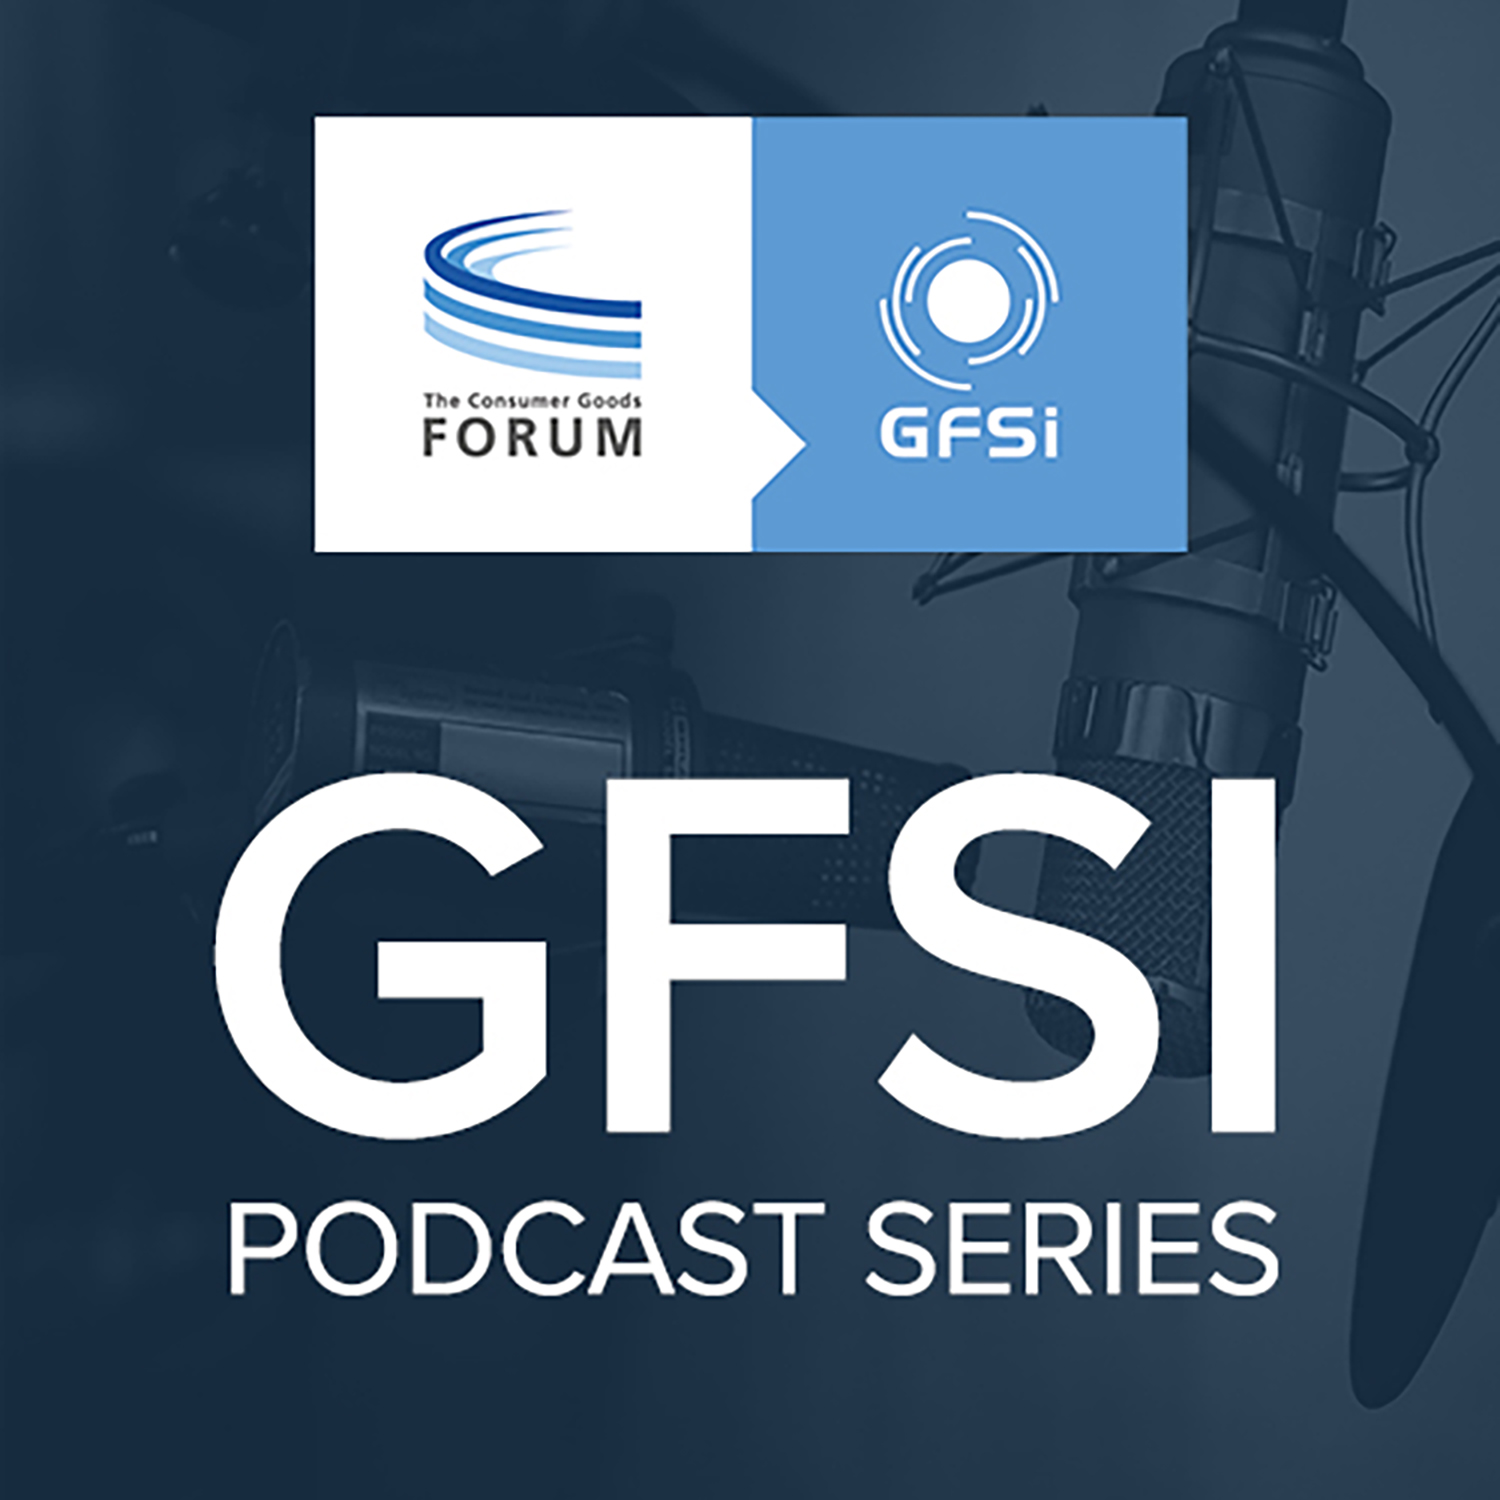 Food Safety & the GFSI's Global Markets Programme